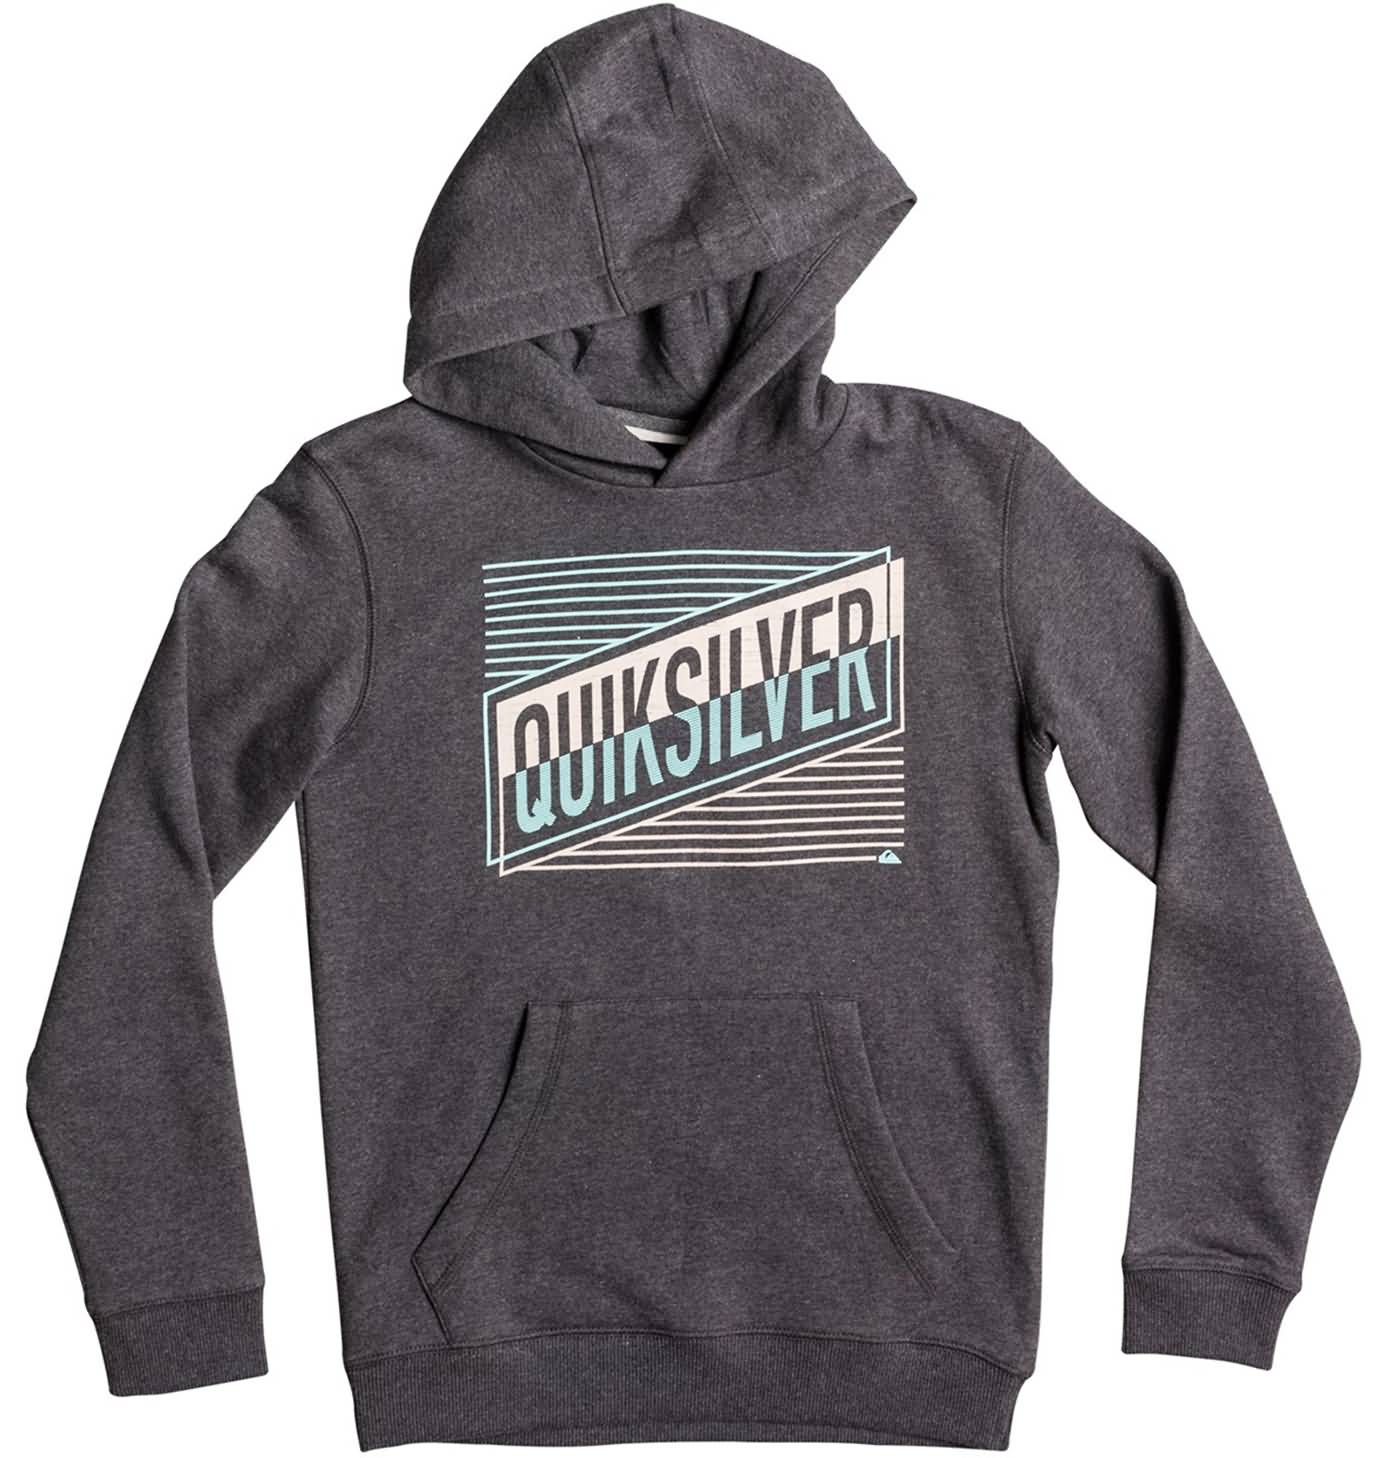 Quiksilver Surf Fall 2017 Youth Boys Lifestyle Jackets & Hoodies Preview